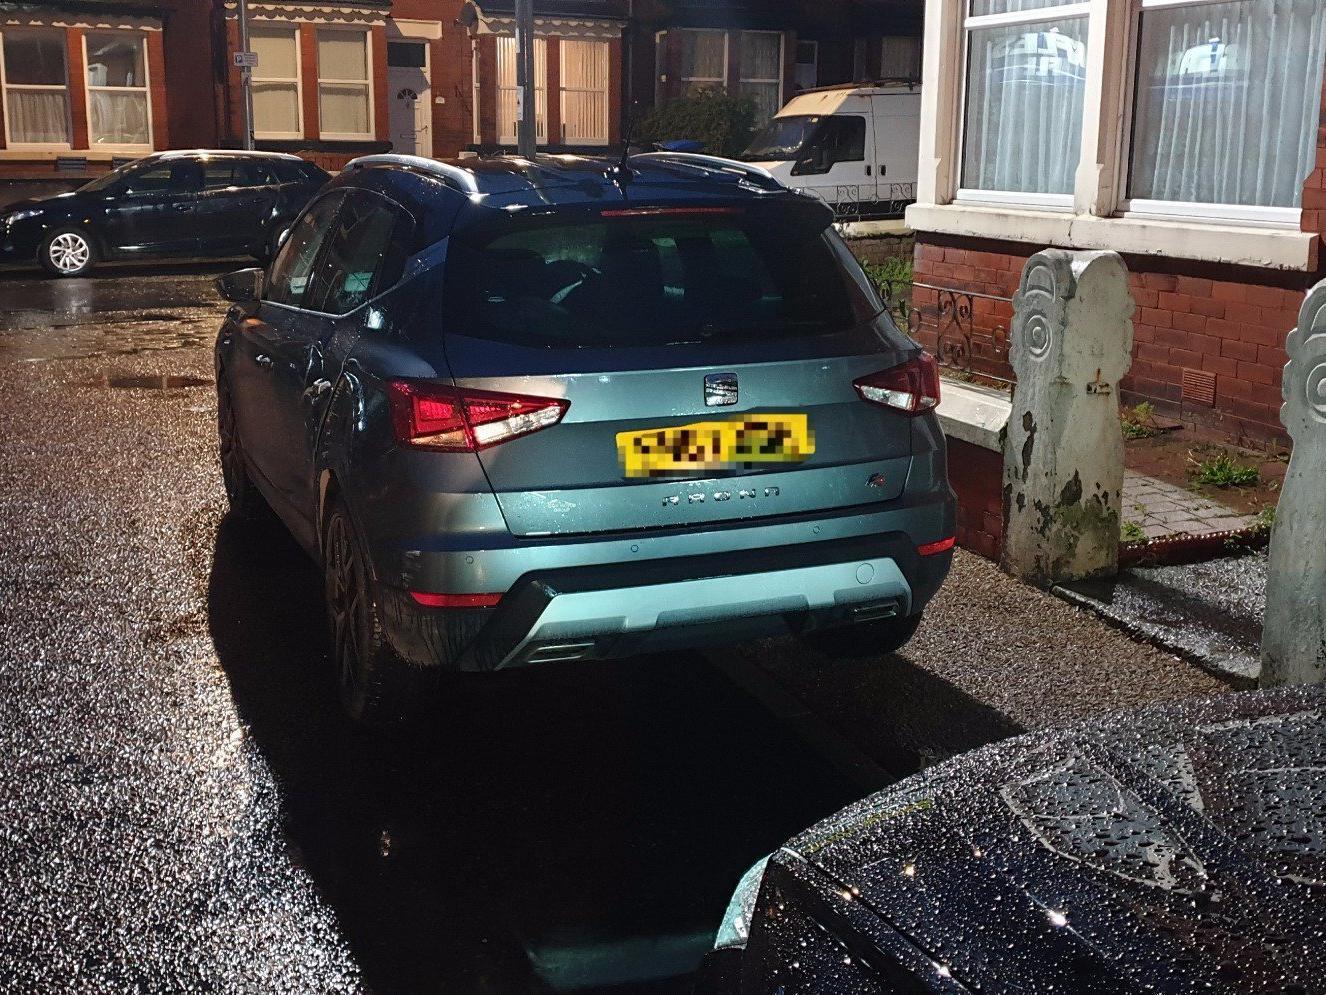 This vehicle was recently stolen during a house burglary in Blackpool. Found abandoned this evening in an alleyway and recovered for forensic analysis by HO75. CCTV enquiries ongoing